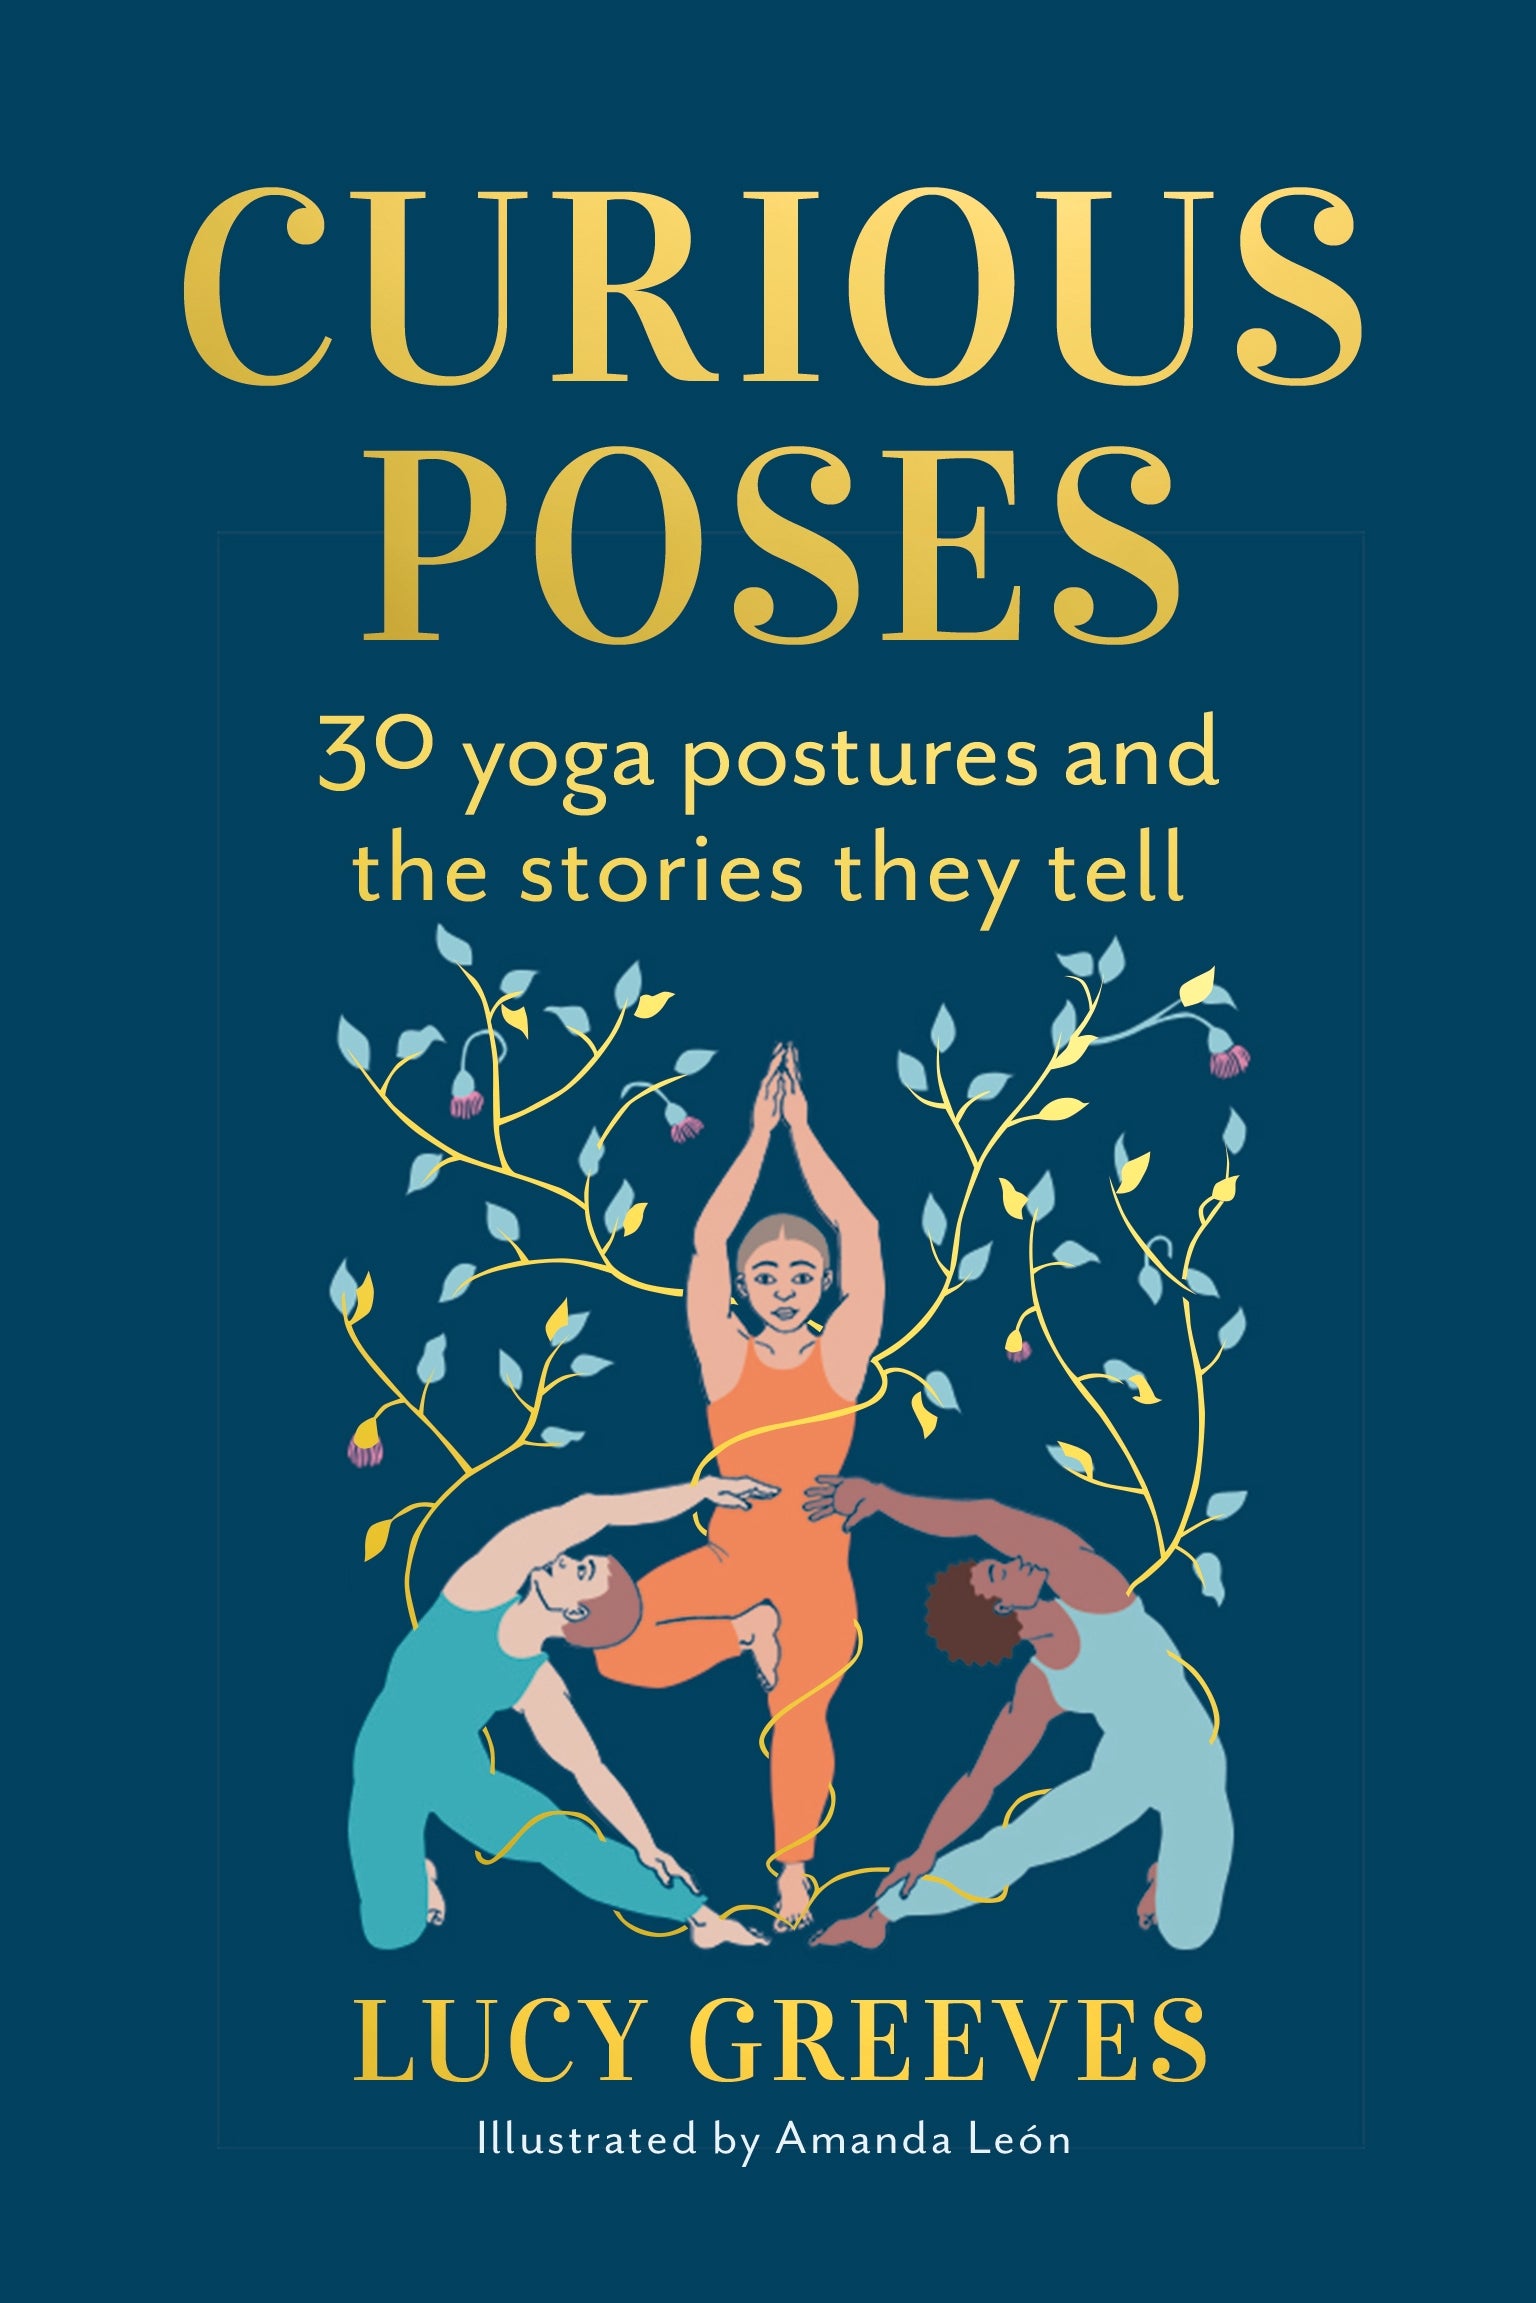 A book cover for Curious Poses, by Lucy Greeves
